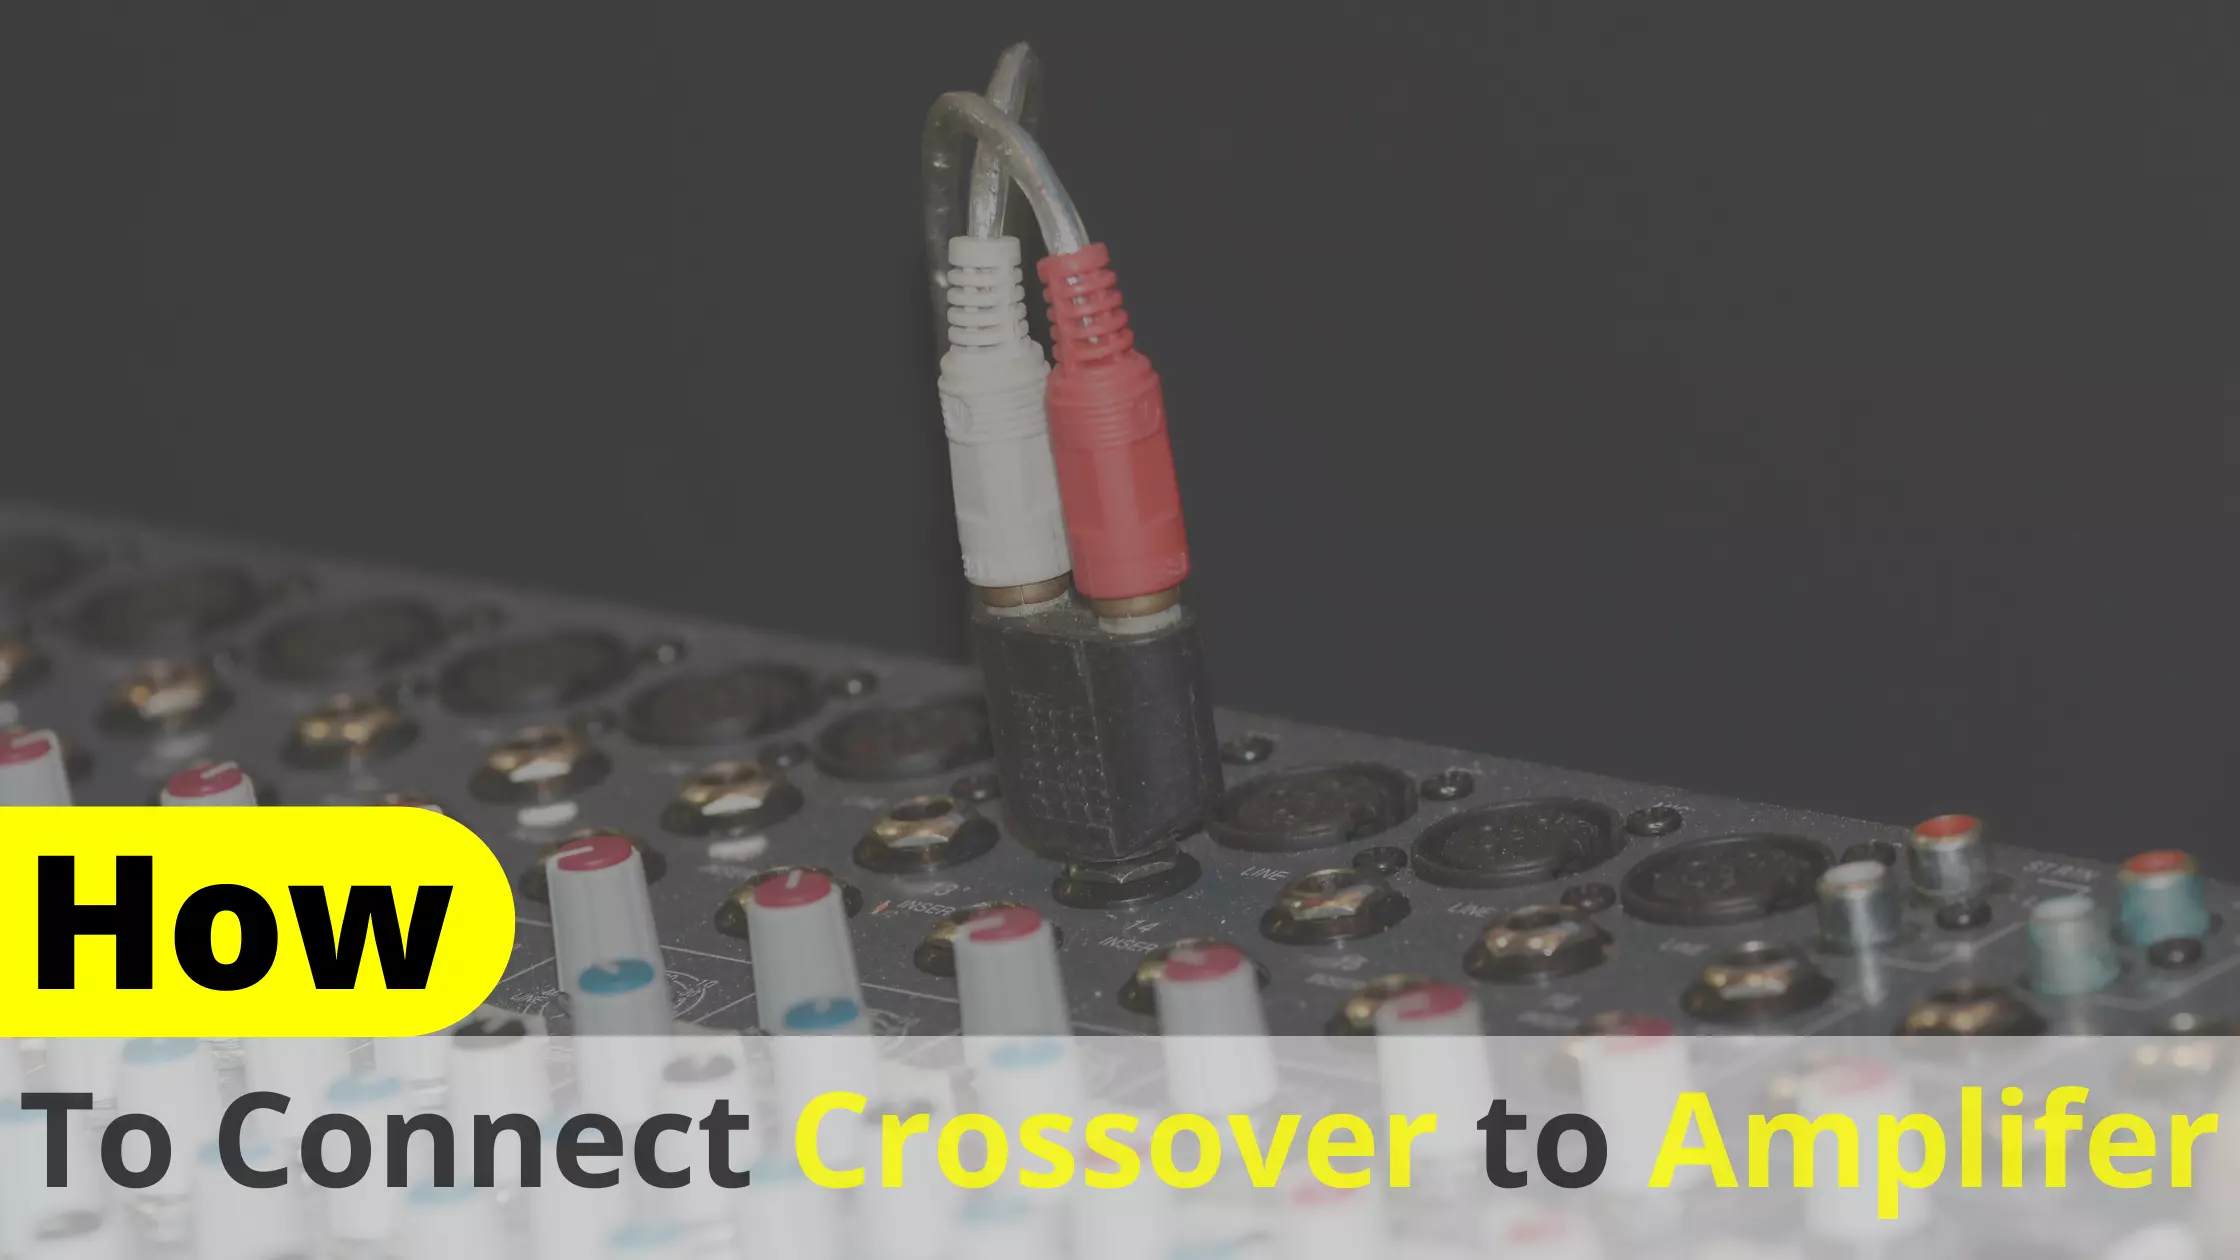 How To Connect a Crossover To An Amplifier?